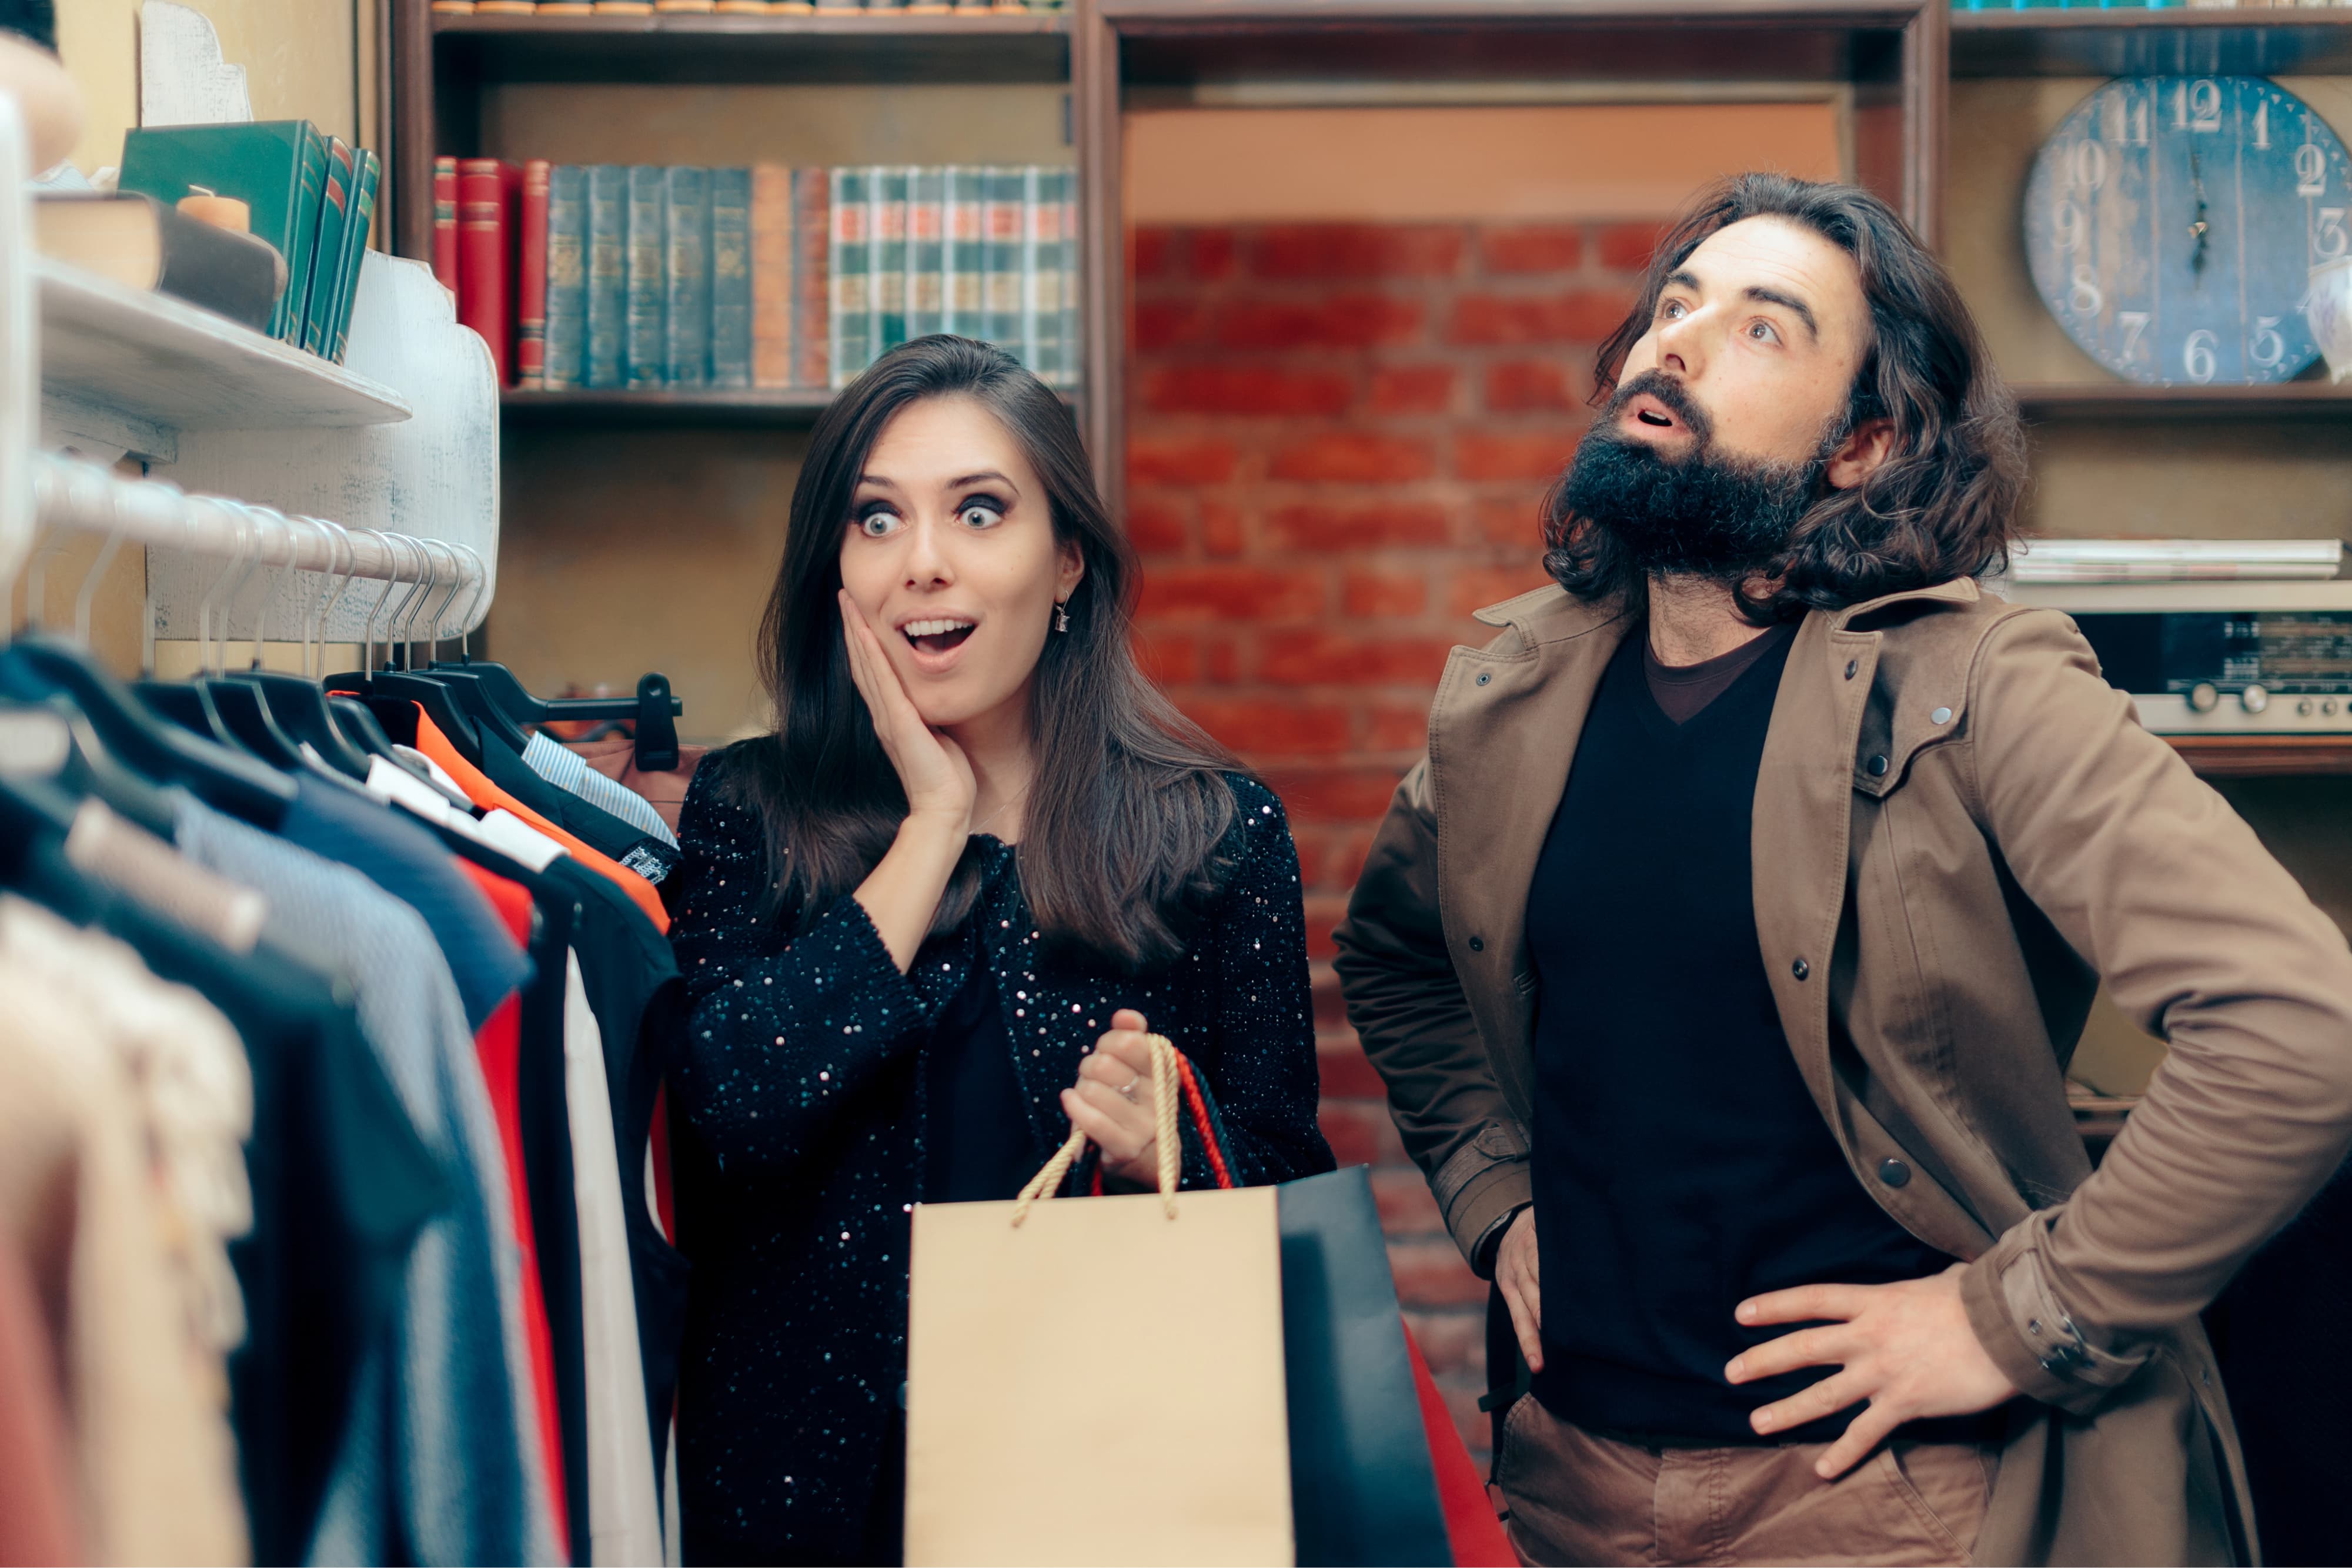 Woman being demanding when shopping with her husband